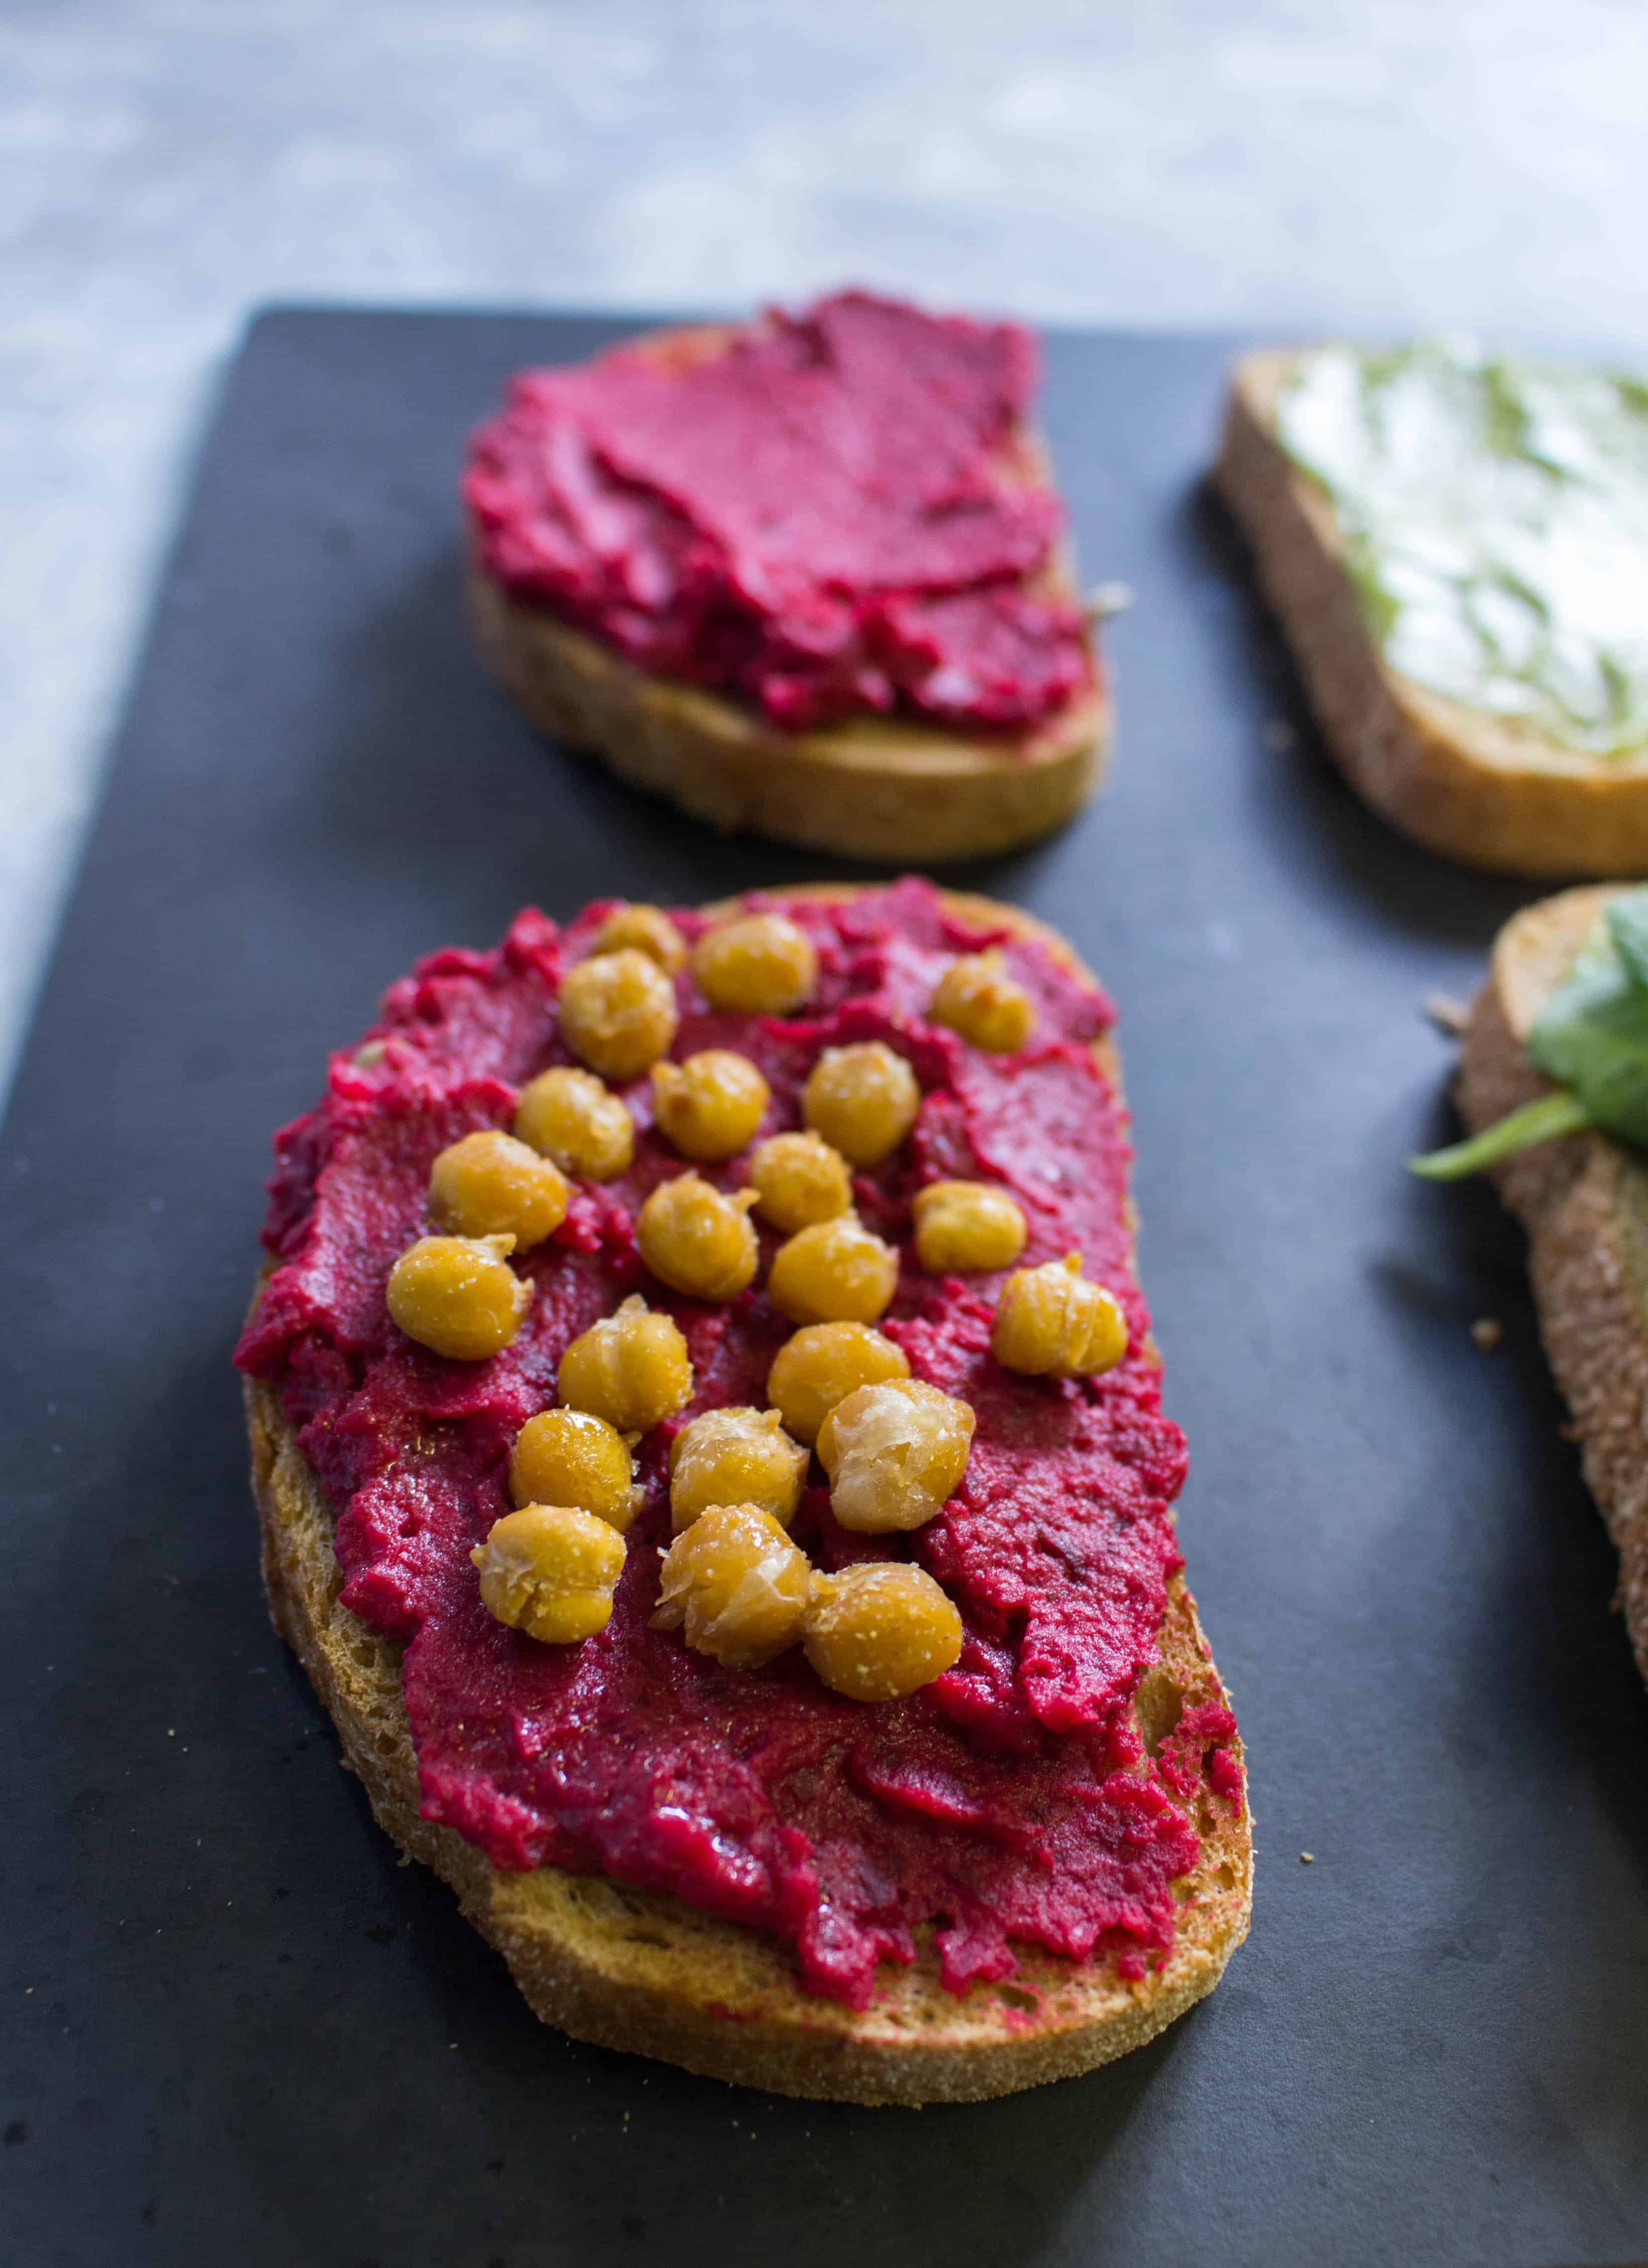 Work Week Lunch: Beet Hummus, Guacamole, Roasted Chickpea, and Spinach Sandwich 